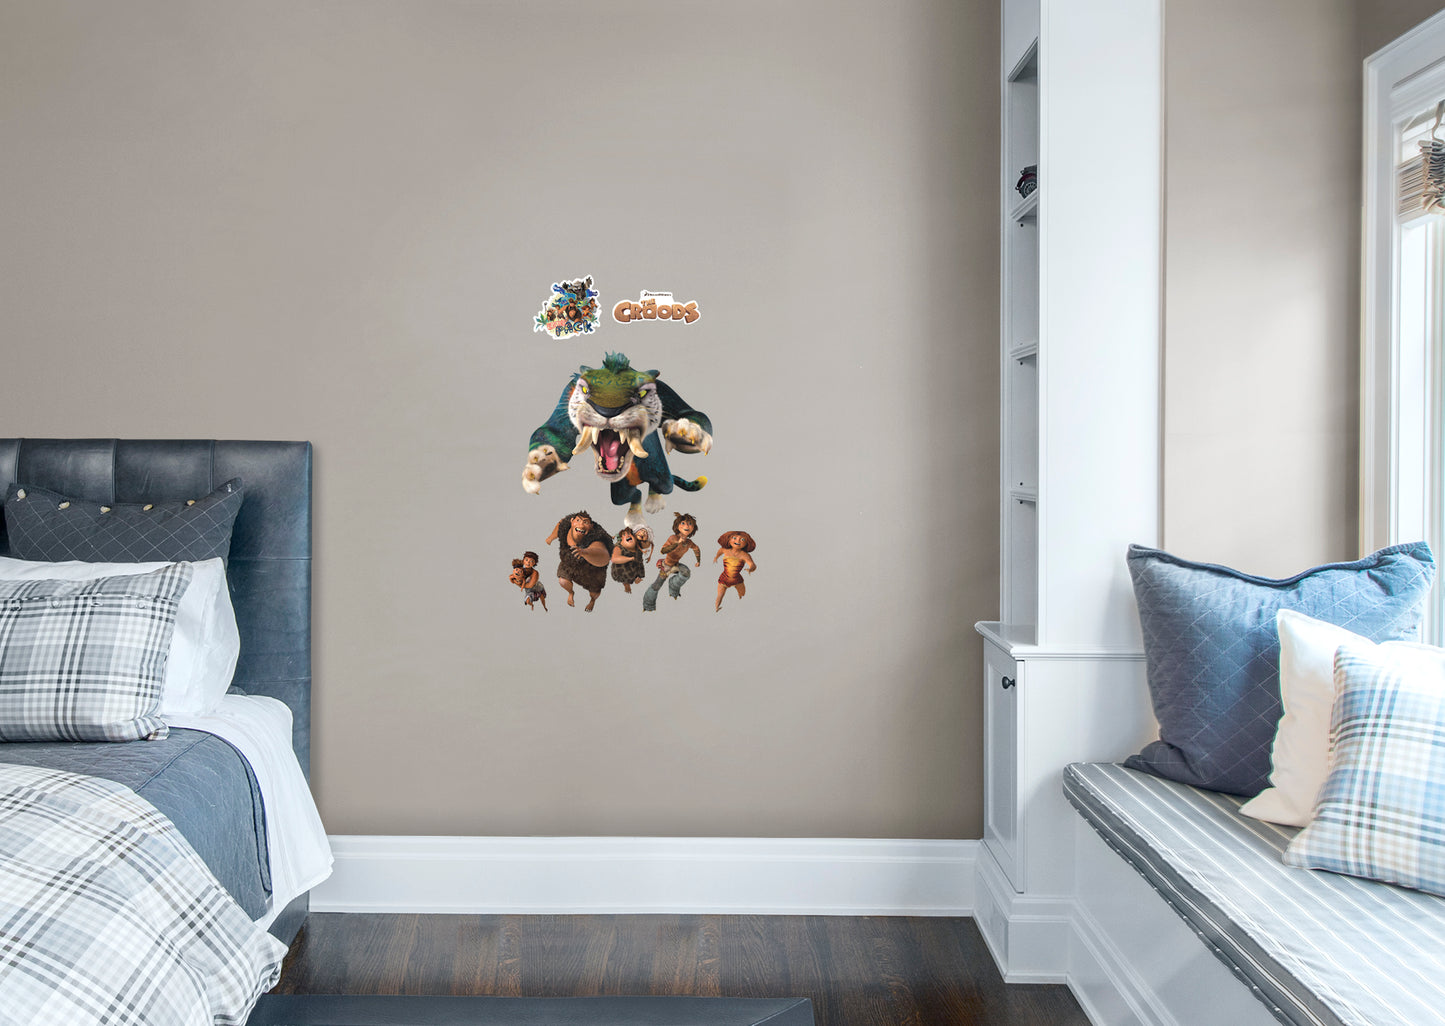 The Croods:  Family Sabretooth RealBig        - Officially Licensed NBC Universal Removable Wall   Adhesive Decal